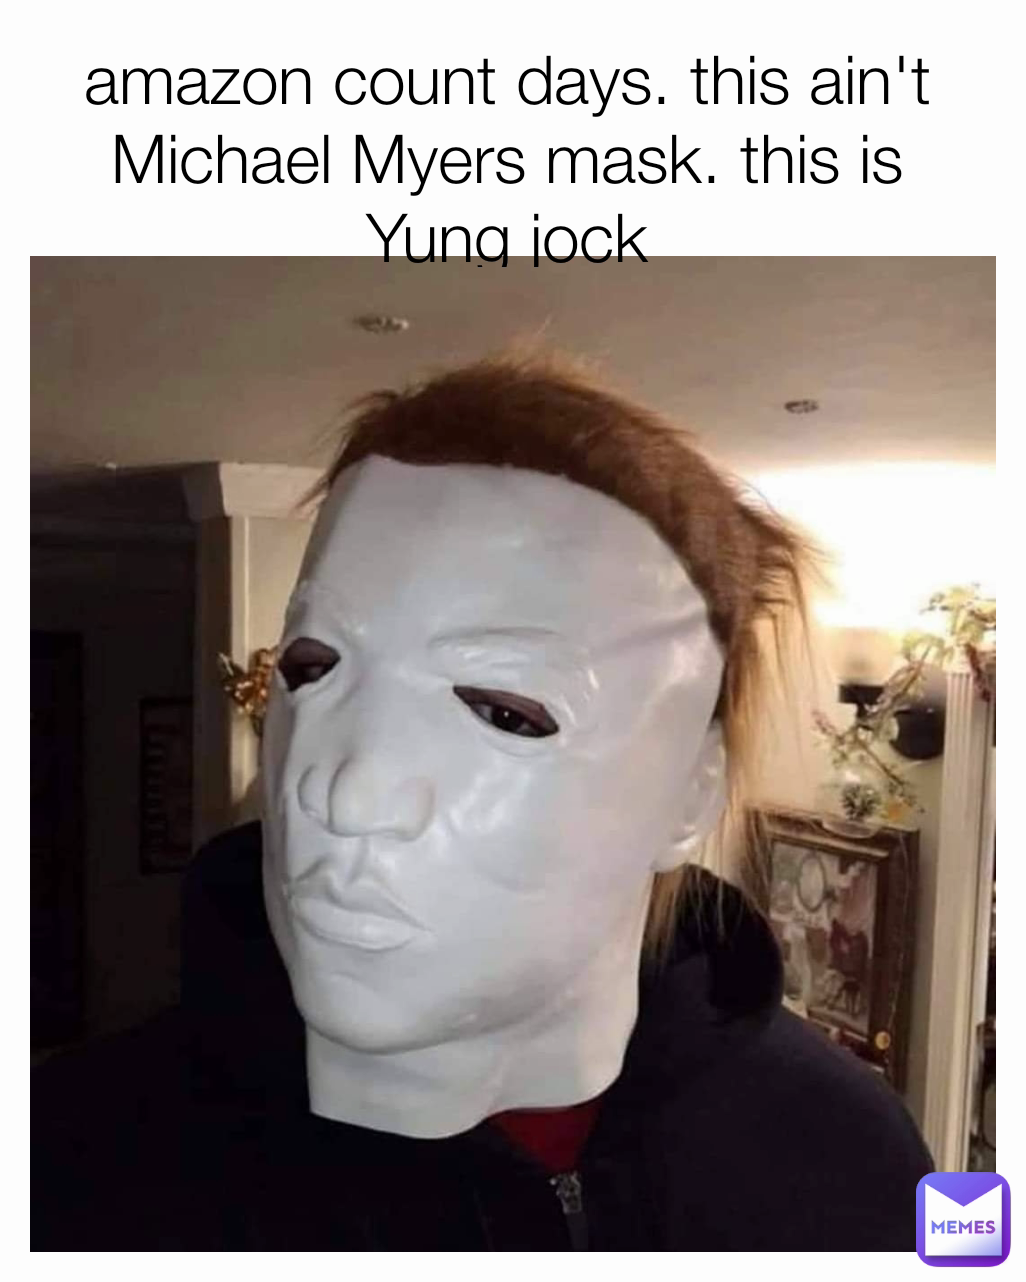 Tage af Wreck Tage med amazon count days. this ain't Michael Myers mask. this is Yung jock |  @whoyube | Memes